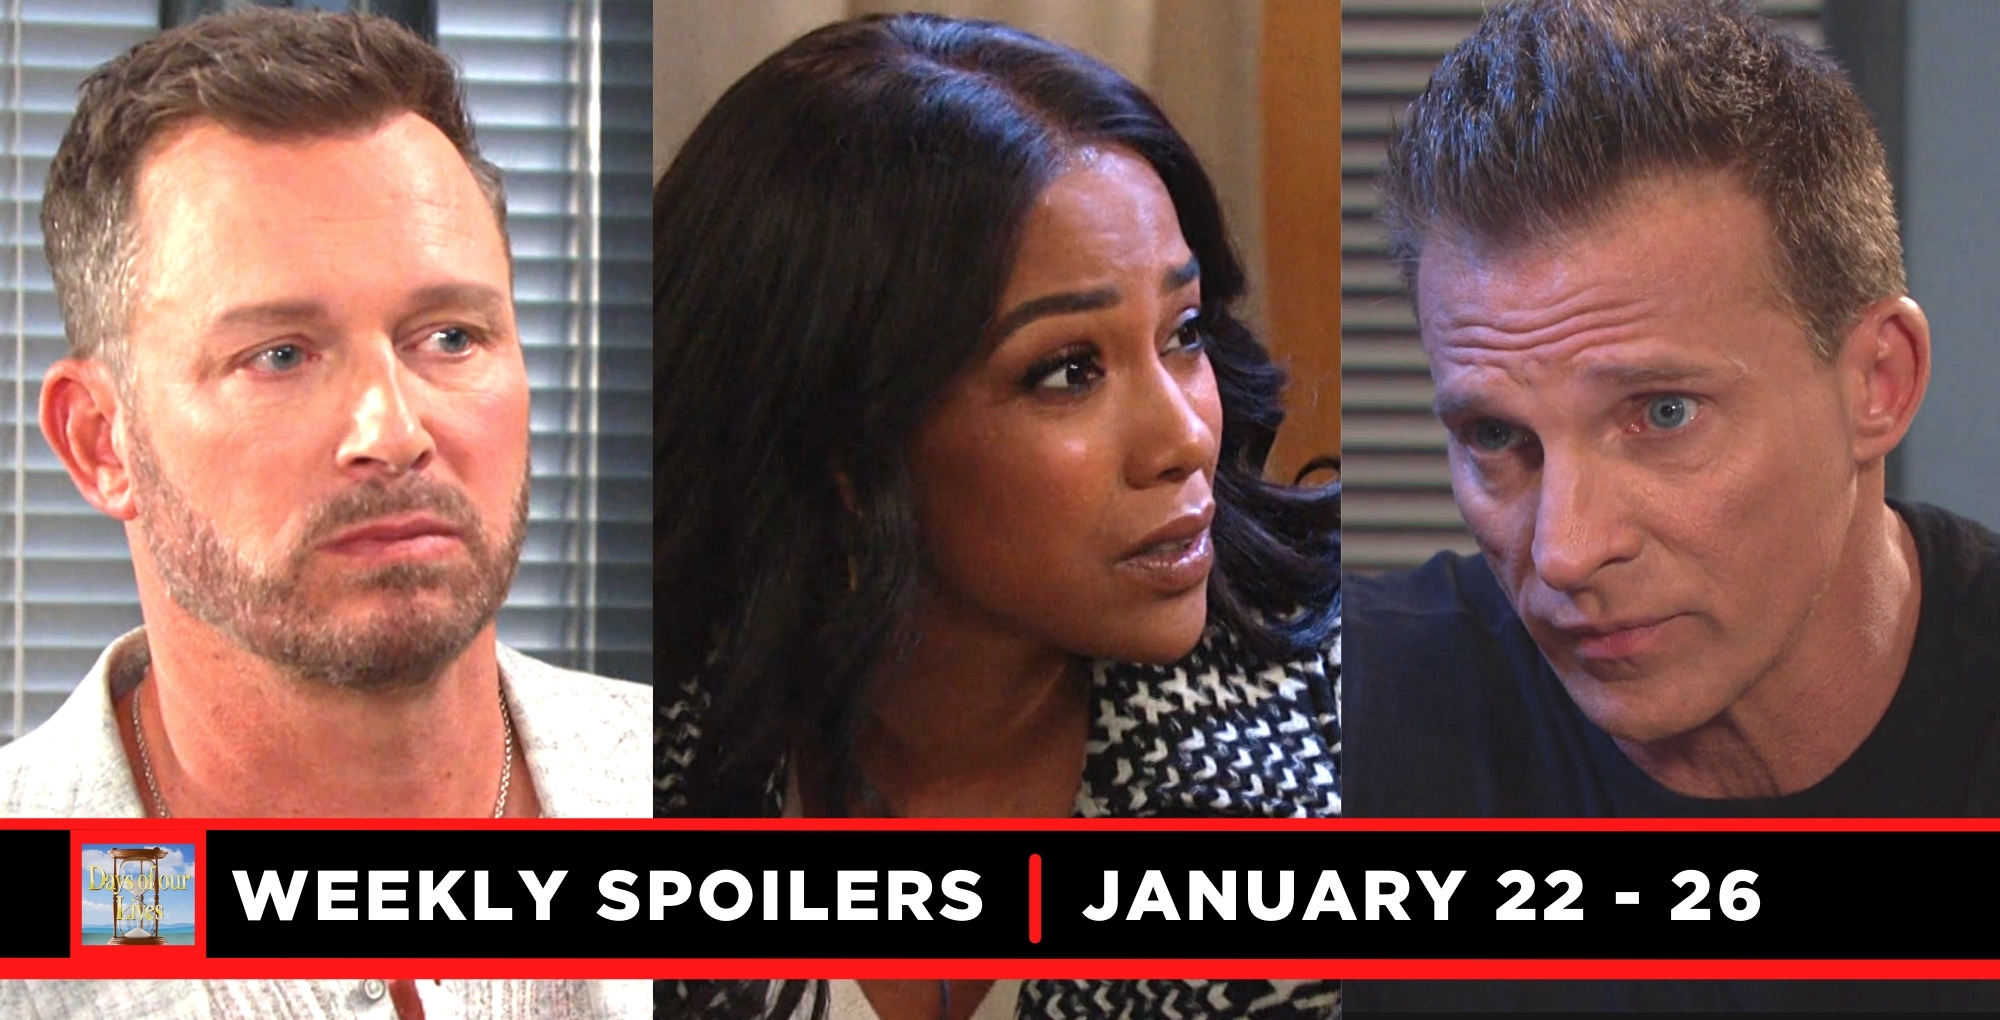 days of our lives spoilers for the week of january 22-26, brady, chanel, and harris.